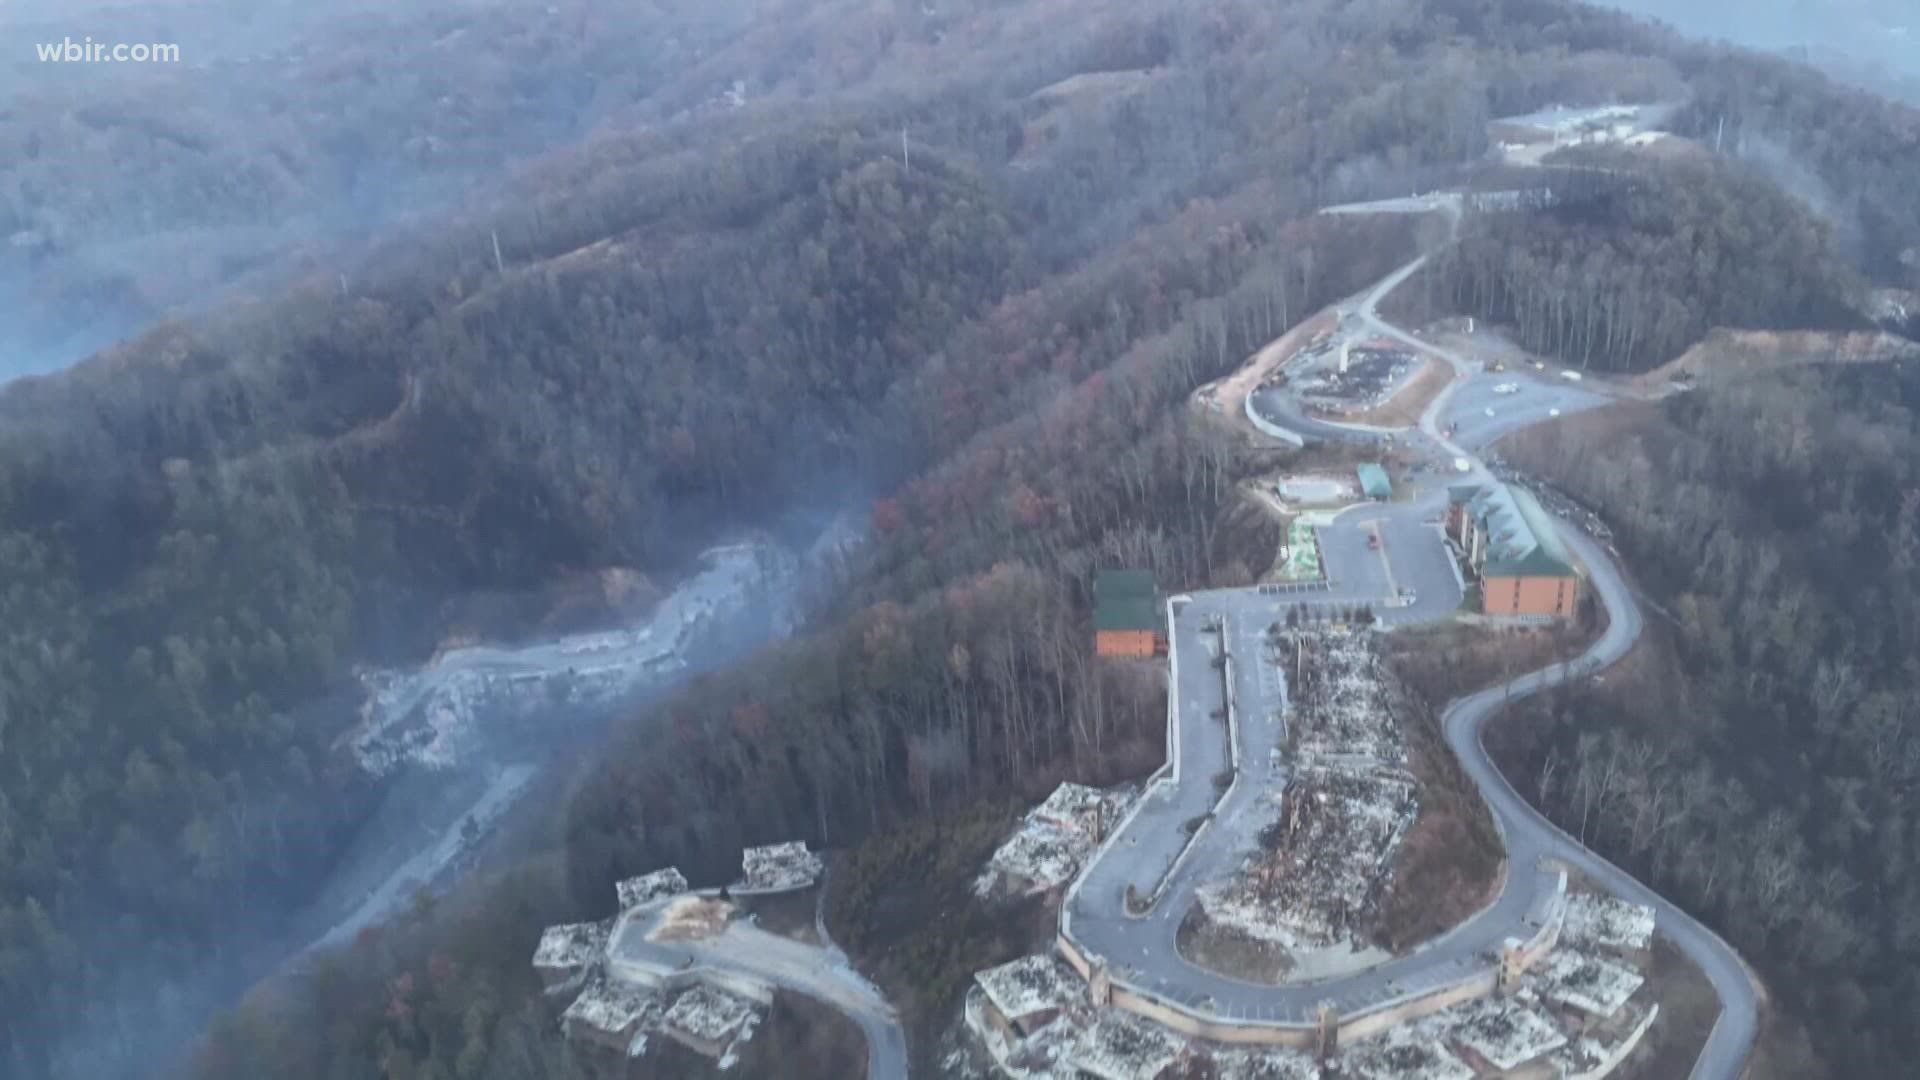 Gatlinburg and Sevier County officials originally said that a memorial for the 2016 wildfires would be completed by 2019. However, they haven't broken ground yet.